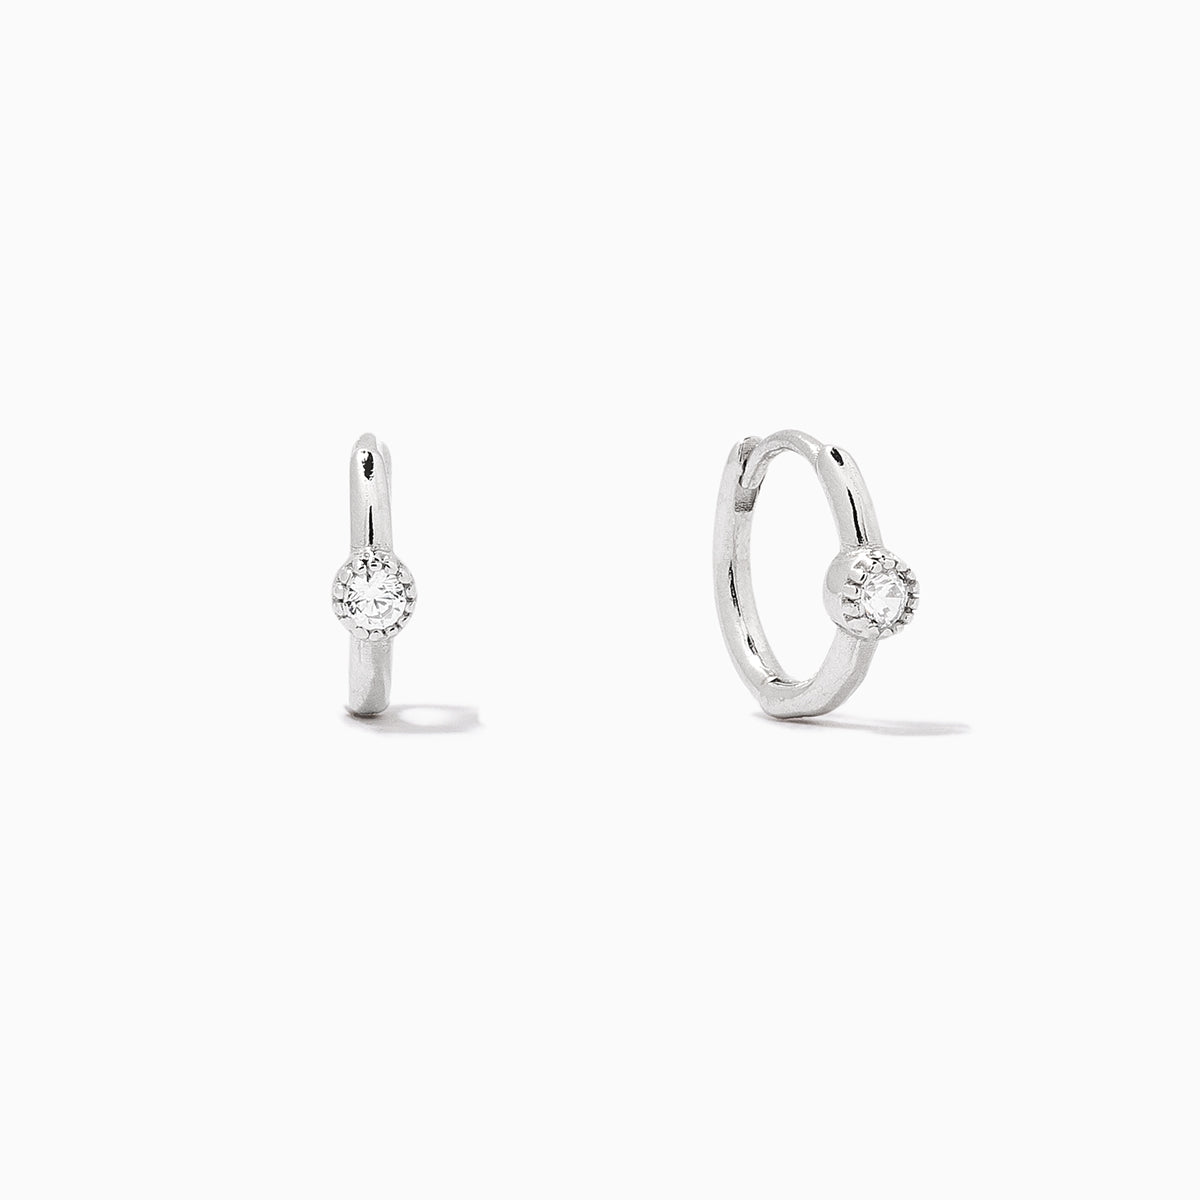 Center Stage Huggie Earrings | Clear Sterling Silver | Product Image | Uncommon James